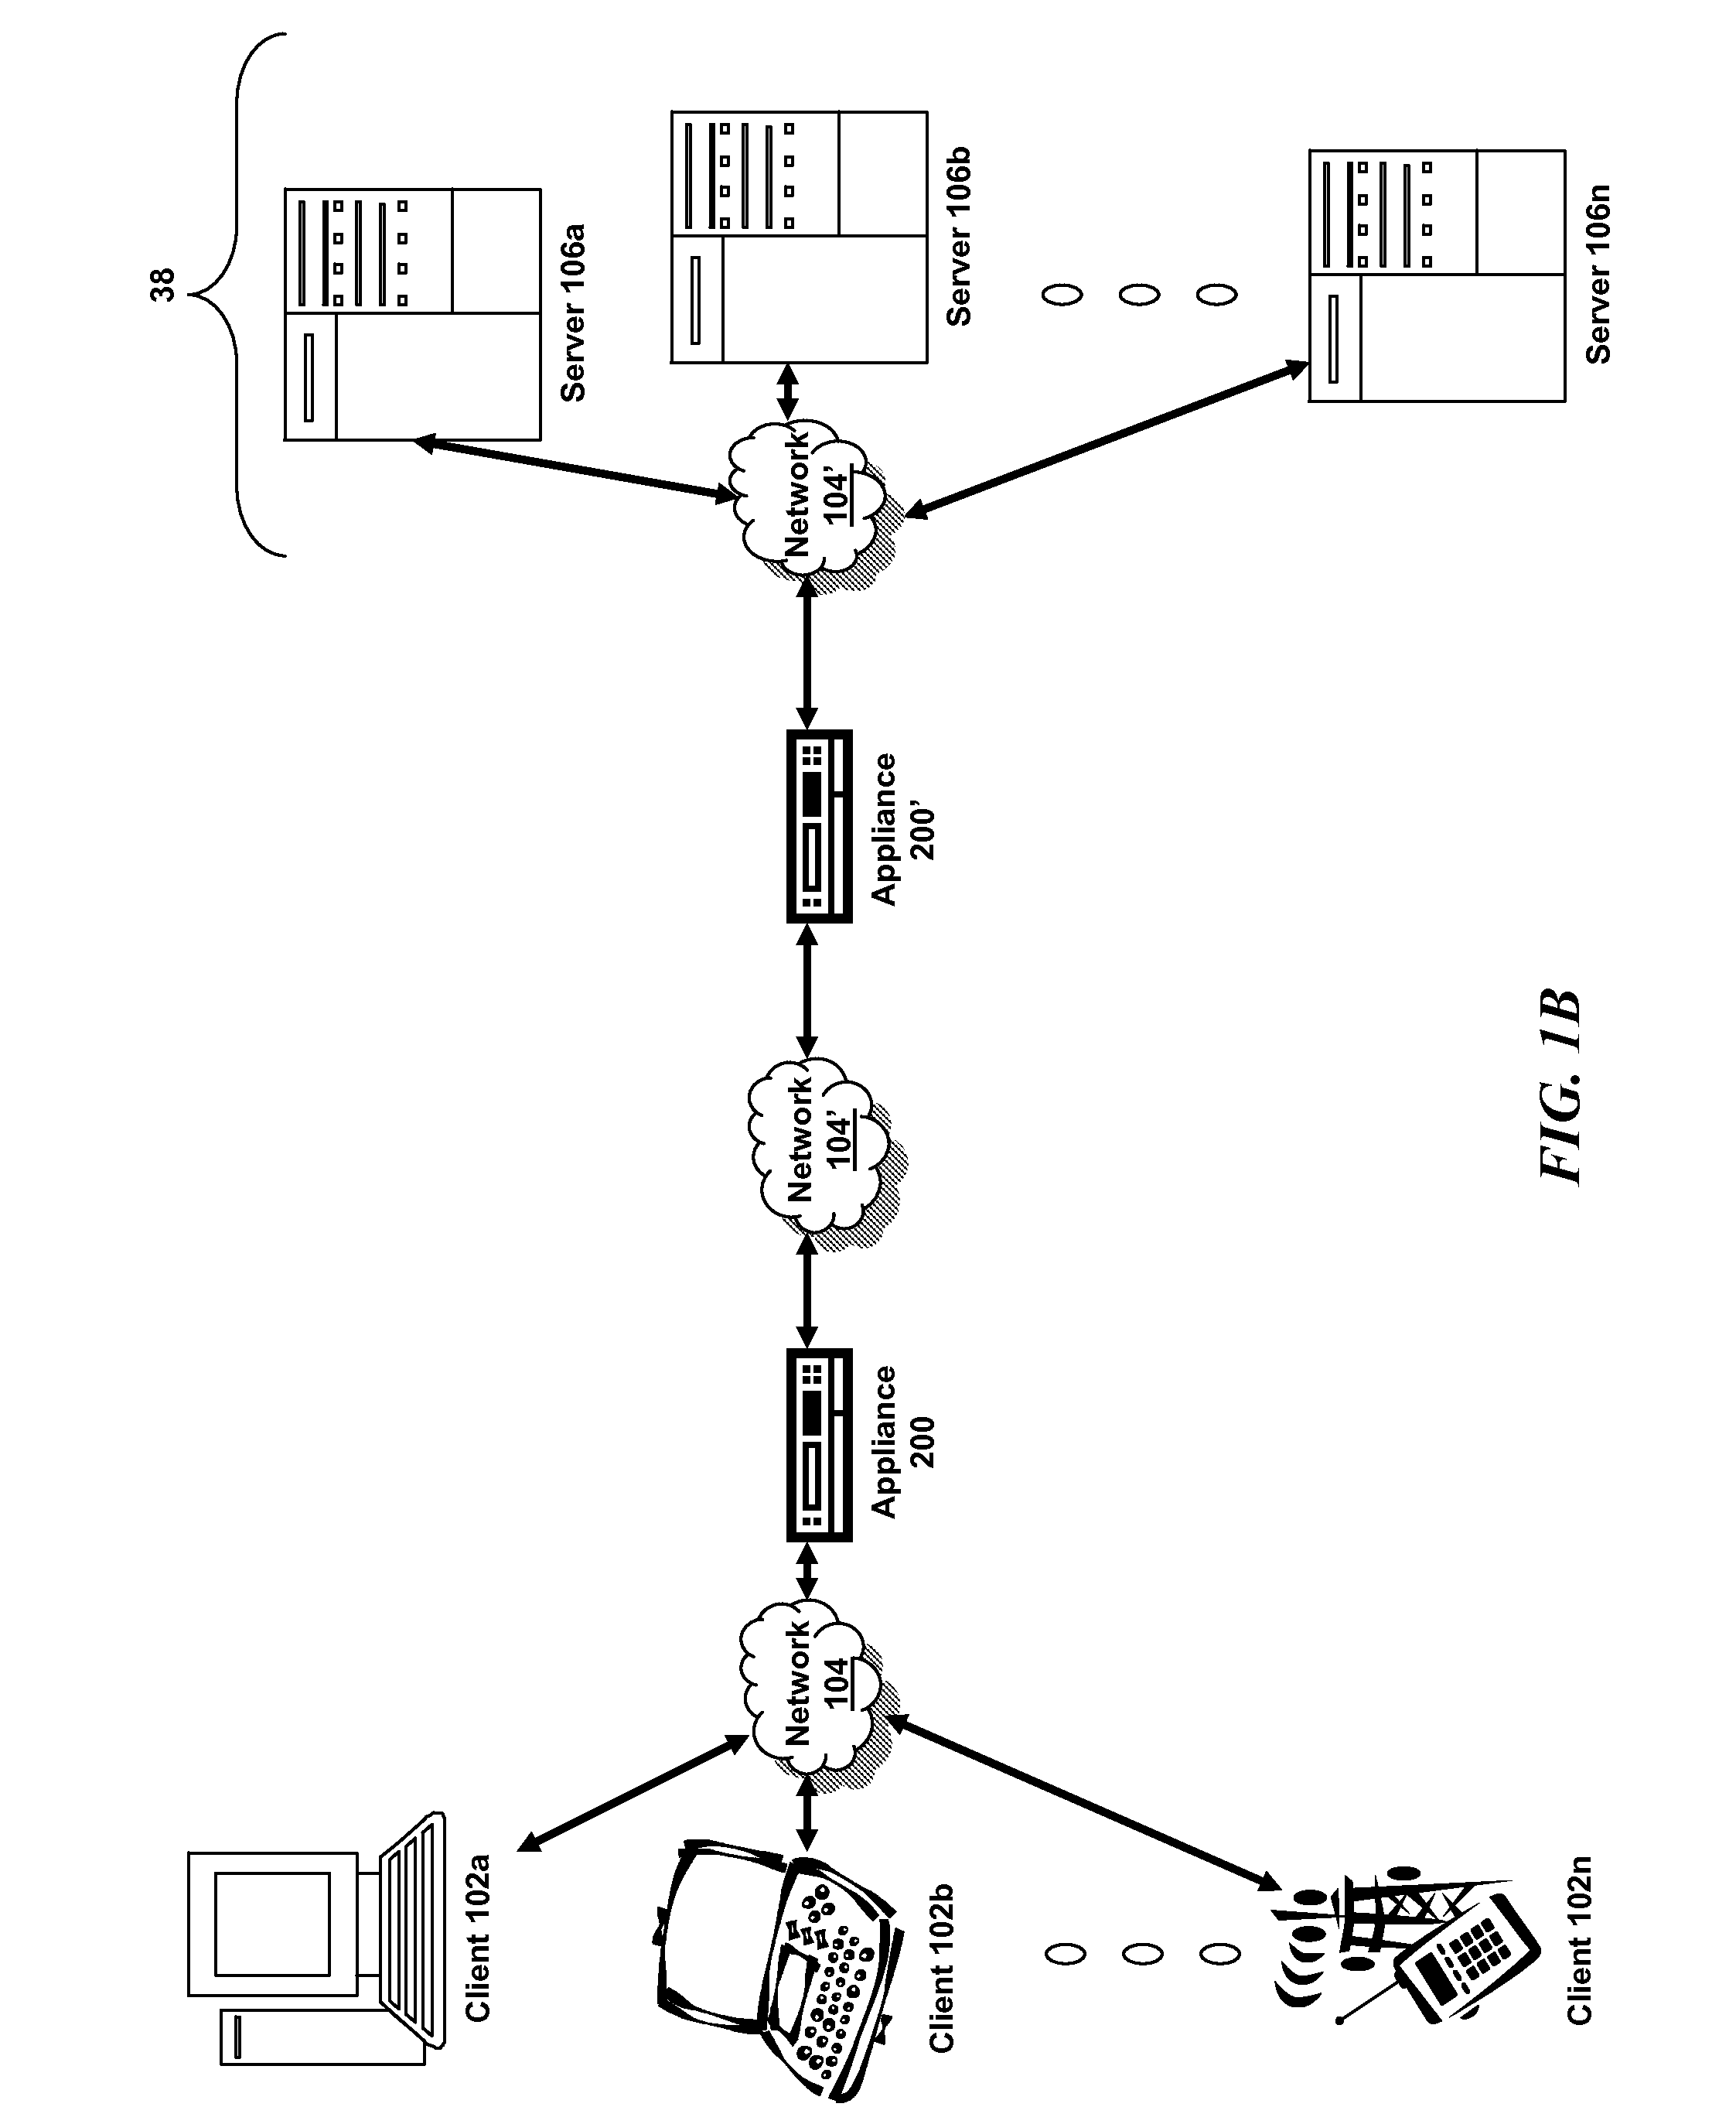 Systems and methods for object rate limiting in multi-core system